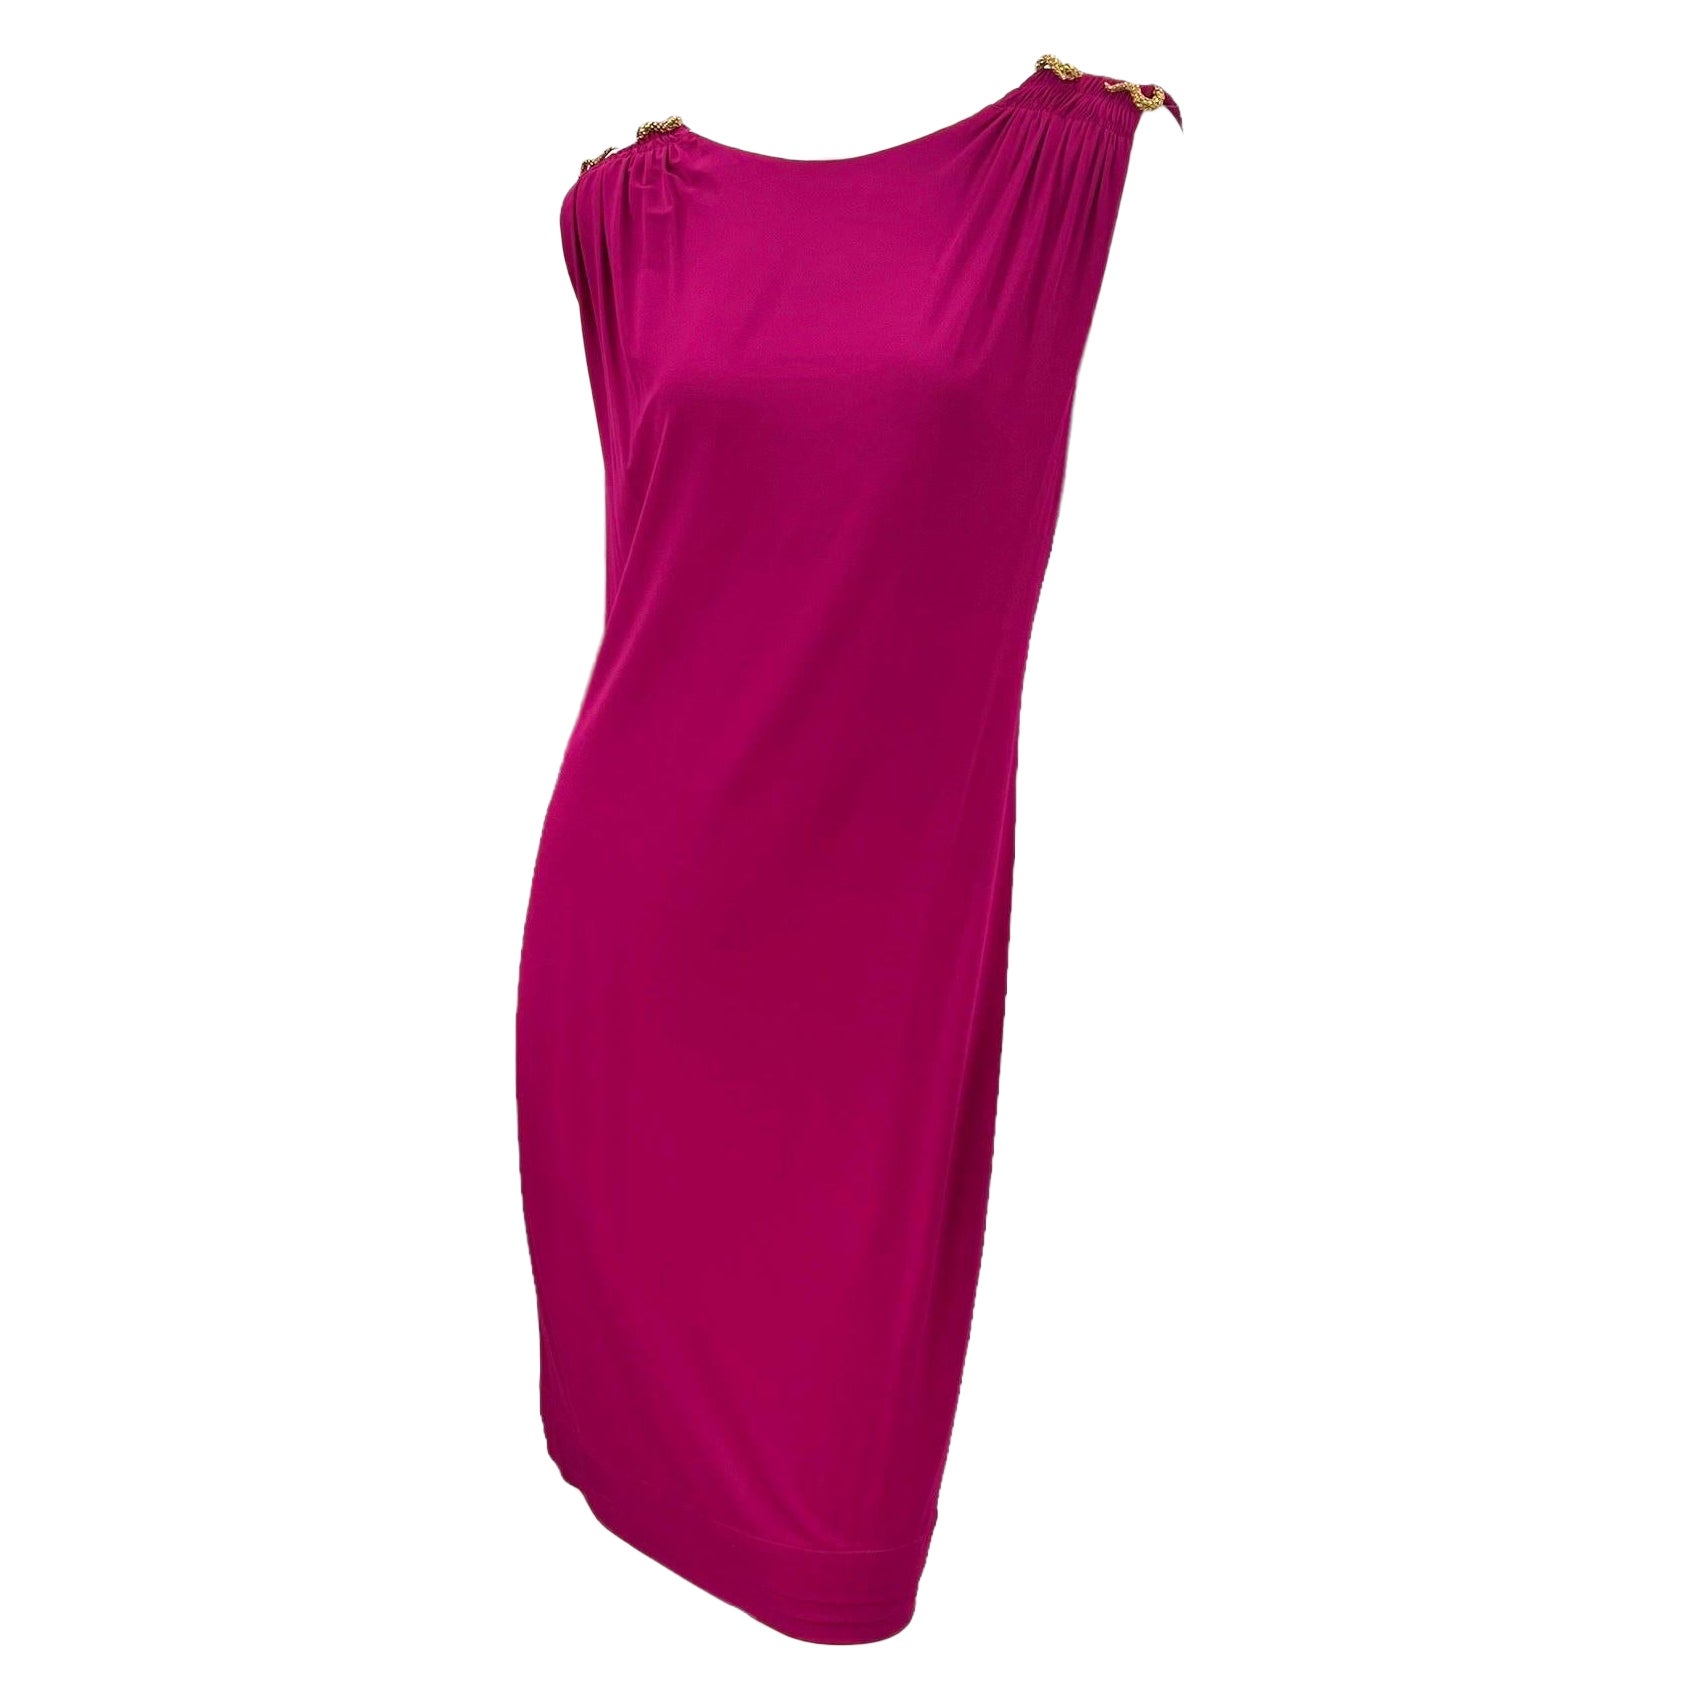 2005 Vintage Roberto Cavalli Fuchsia Pink Dress with Snake details Size 44 For Sale